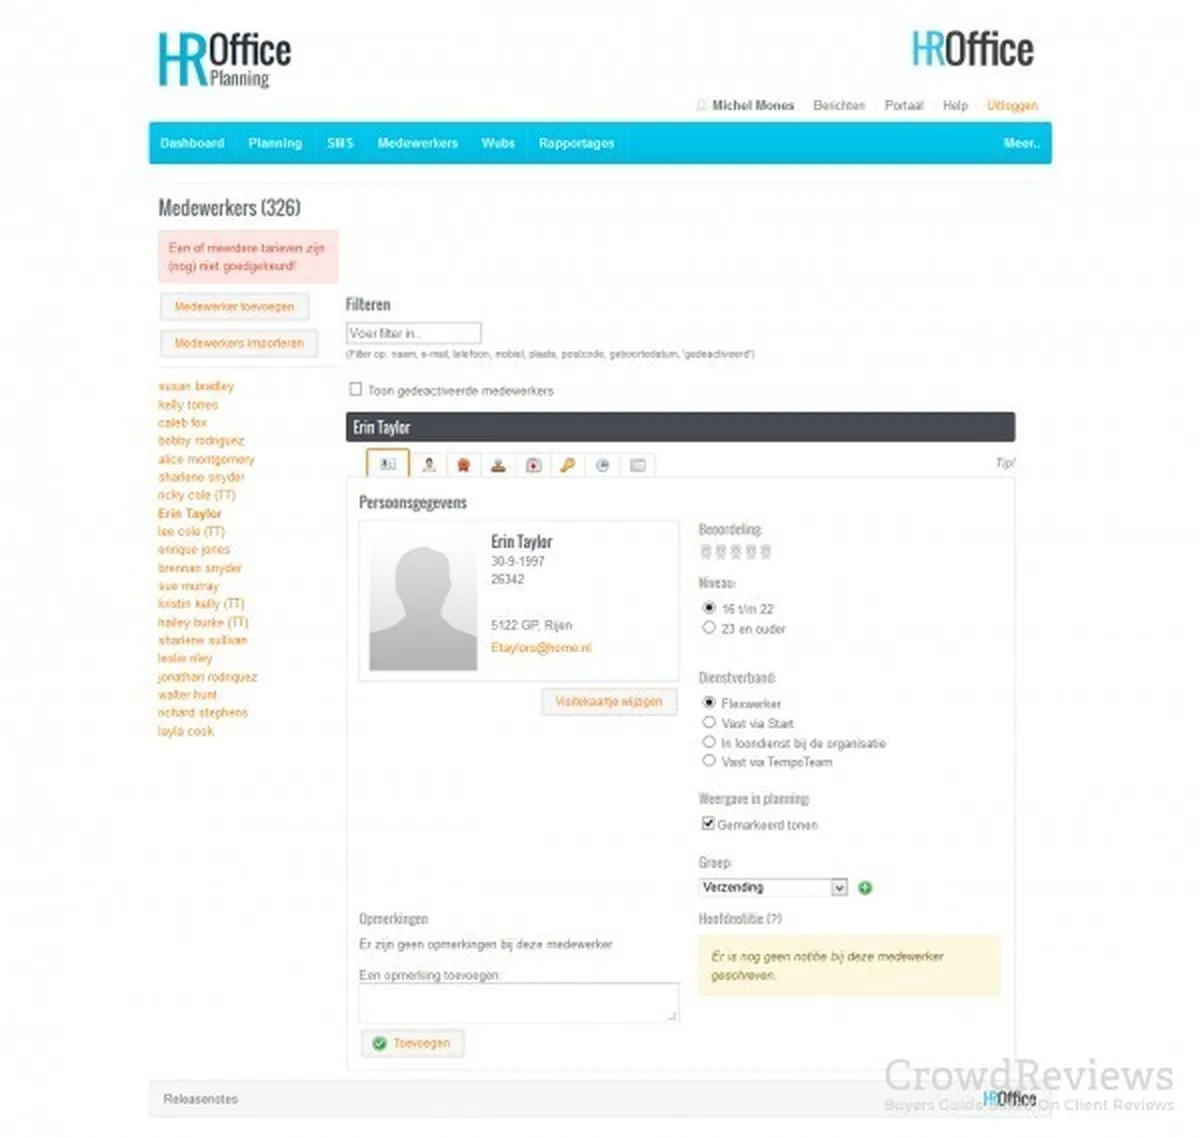 HROffice Review